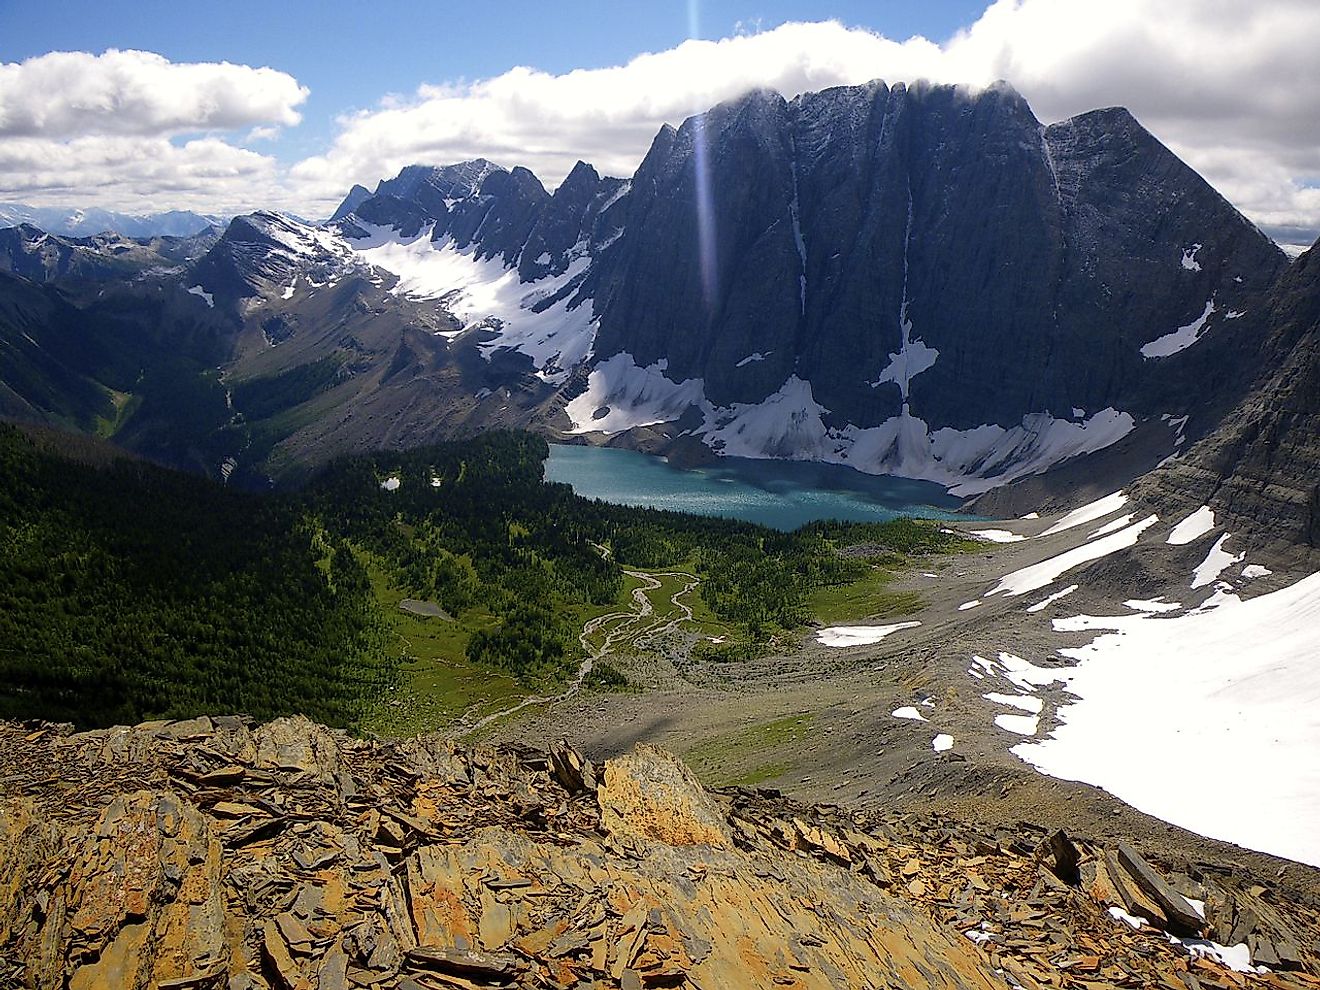 Floe Lake and the Rockwall as viewed from Numa Pass. Image credit: Christopher Fast/Wikimedia.org